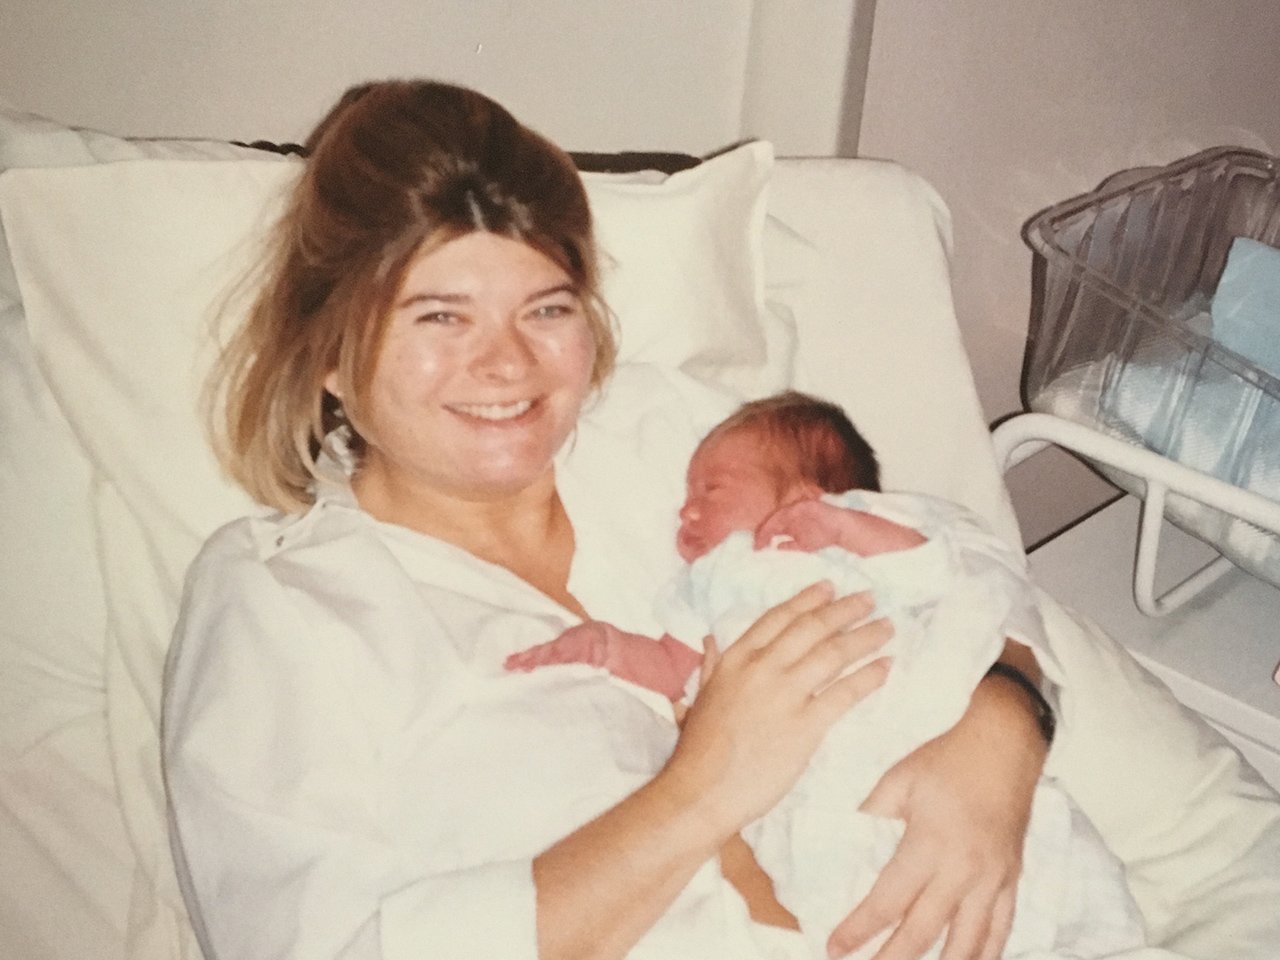 A mom holding her baby in the hospital bed after giving birth